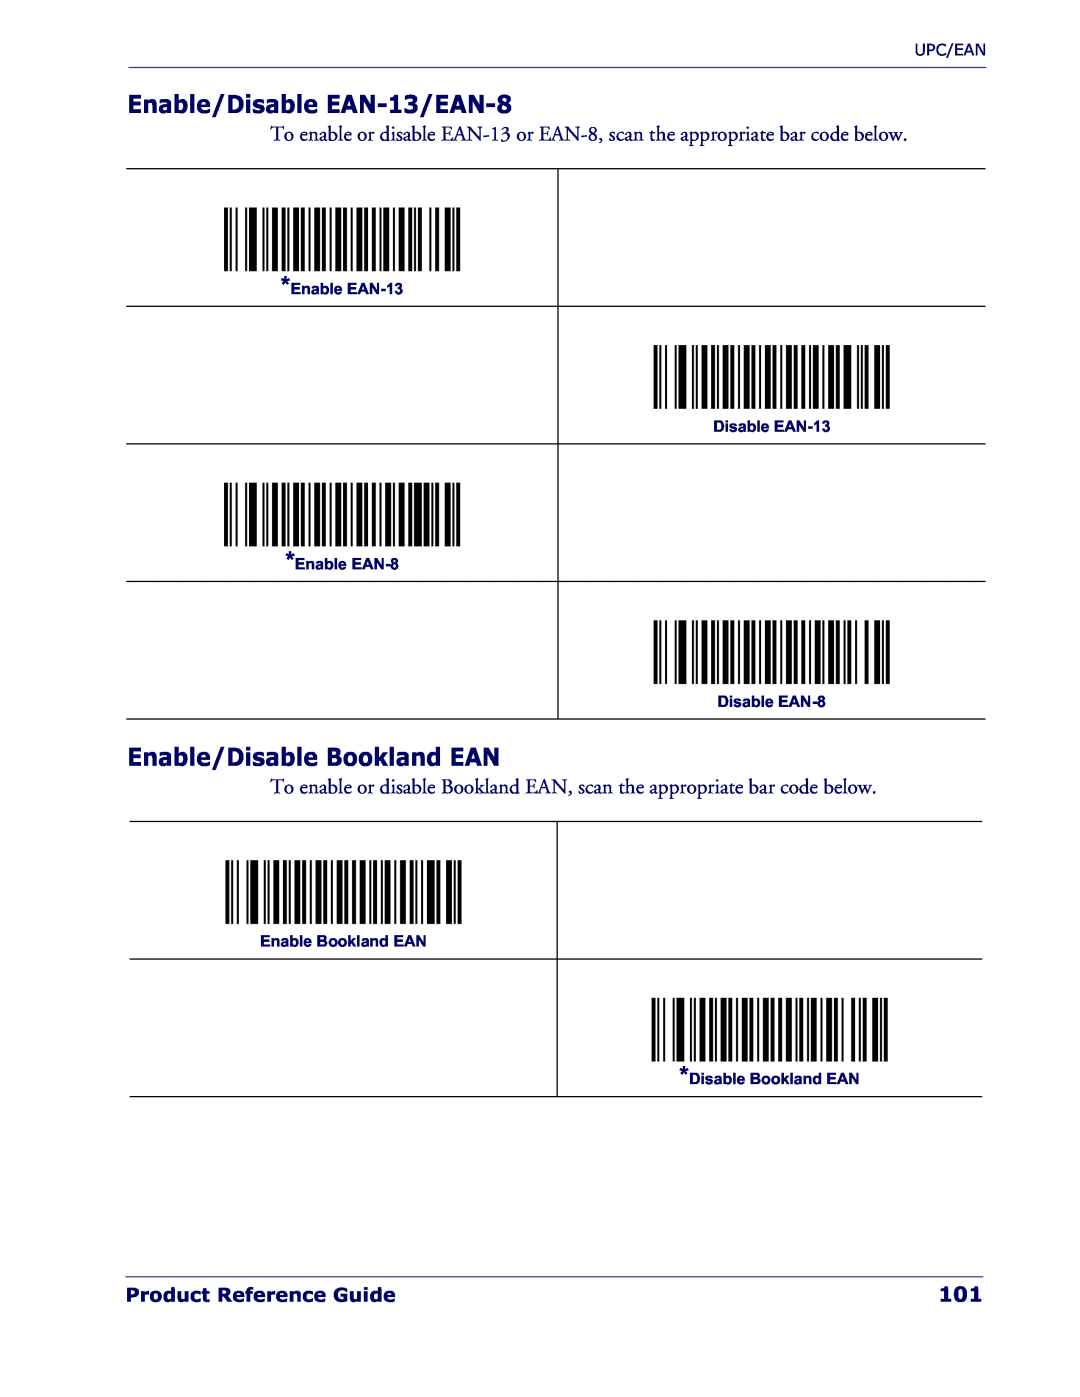 Datalogic Scanning QD 2300 manual Enable/Disable EAN-13/EAN-8, Enable/Disable Bookland EAN, Product Reference Guide 